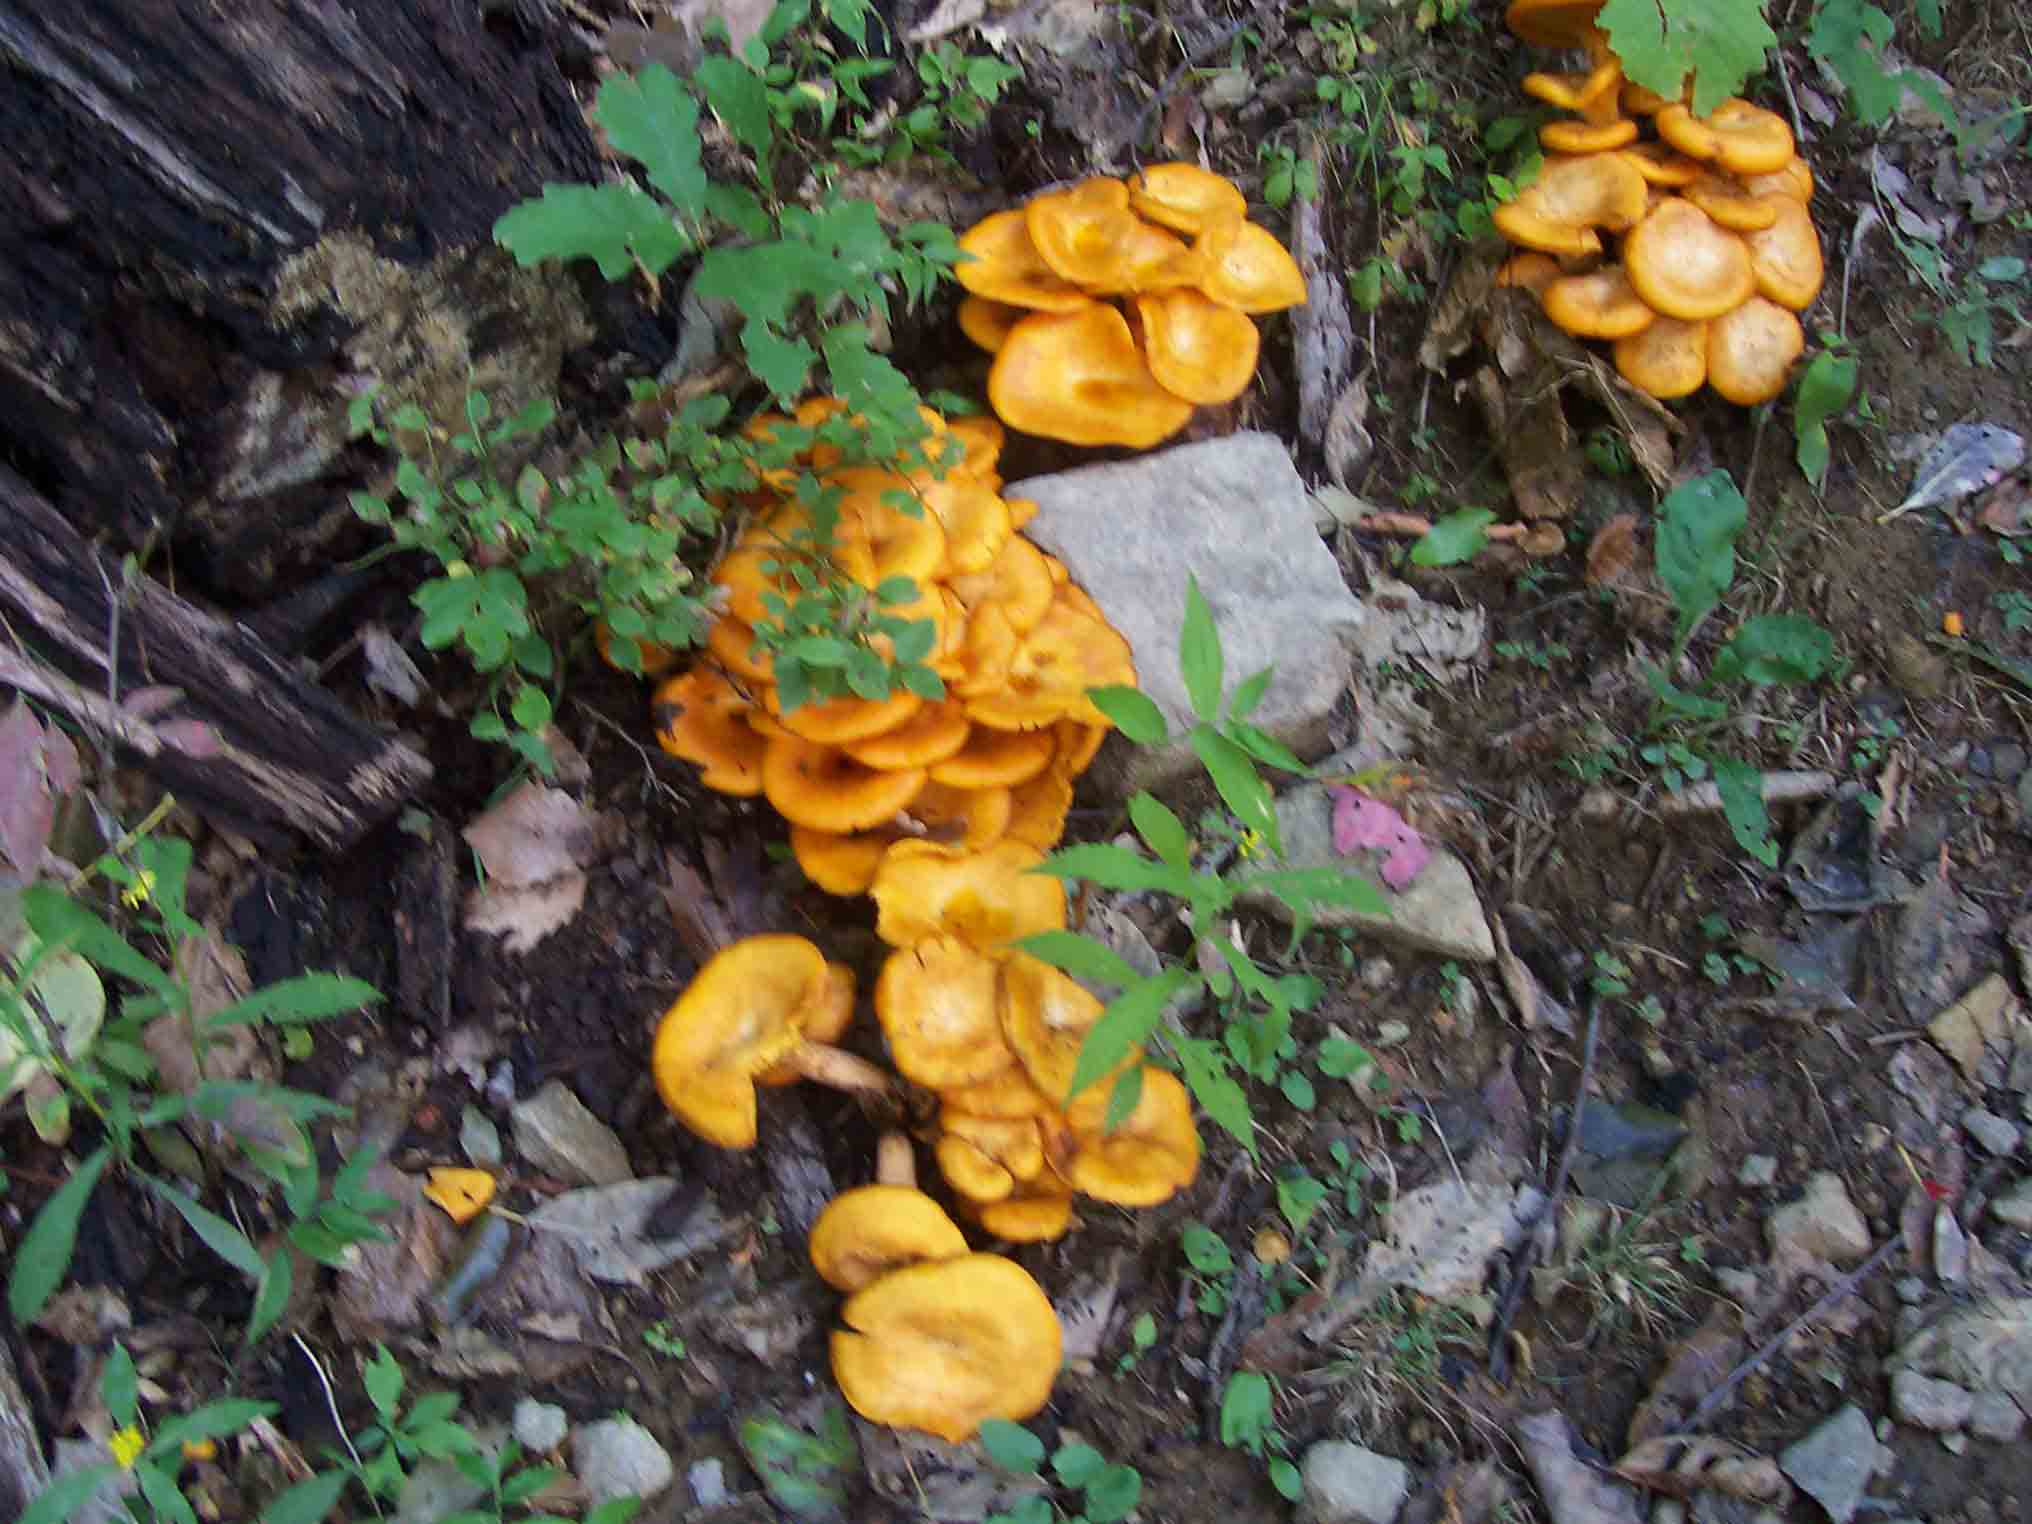 Fungus amongst us. Taken on the southbound 2200 foot descent from Floyd Mt. to Bryant Ridge Shelter.   Courtesy dlcul@conncoll.edu